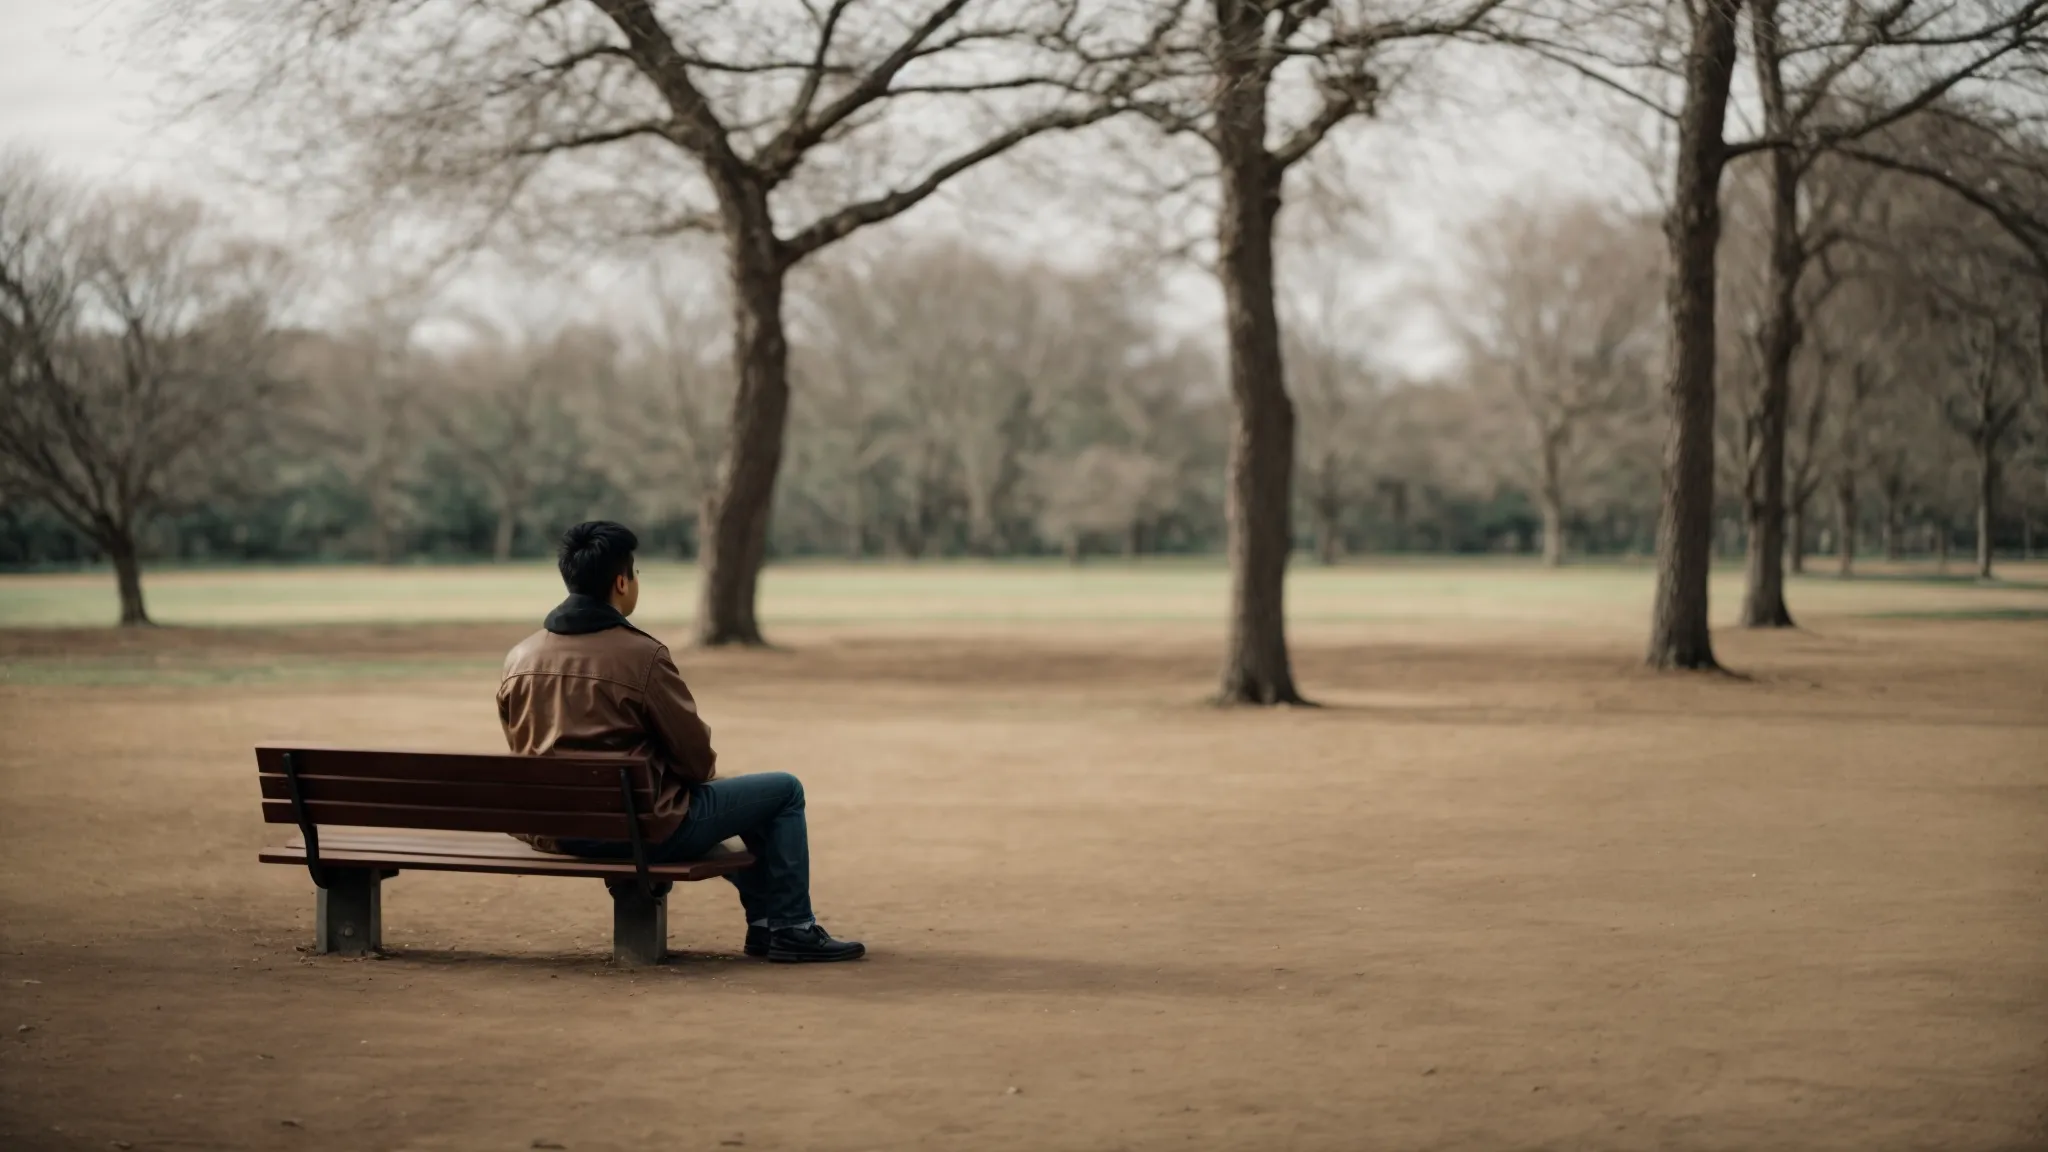 a solitary person sits quietly on a bench in a vast, empty park, contemplating the surrounding space.